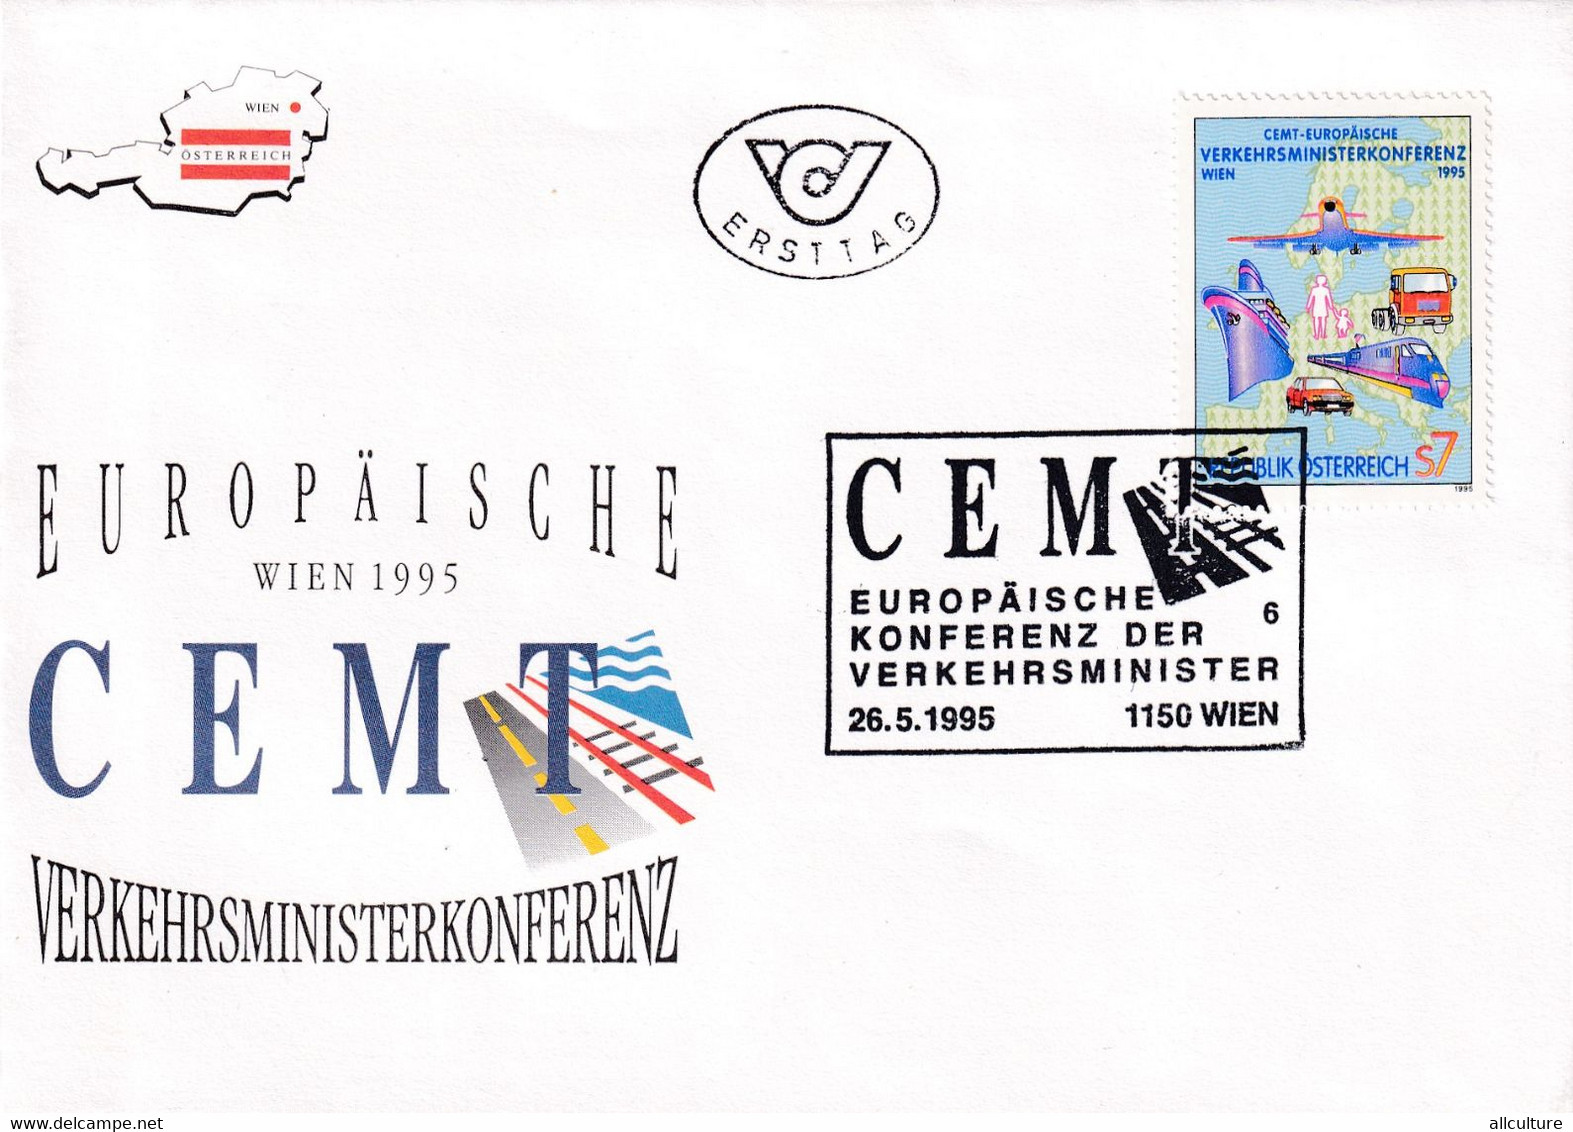 A8203- EUROPEAN CONFERENCE OF THE MINISTERS FOR TRANSPORT 1995  REPUBLIC OESTERREICH USED STAMP ON COVER AUSTRIA - Briefe U. Dokumente